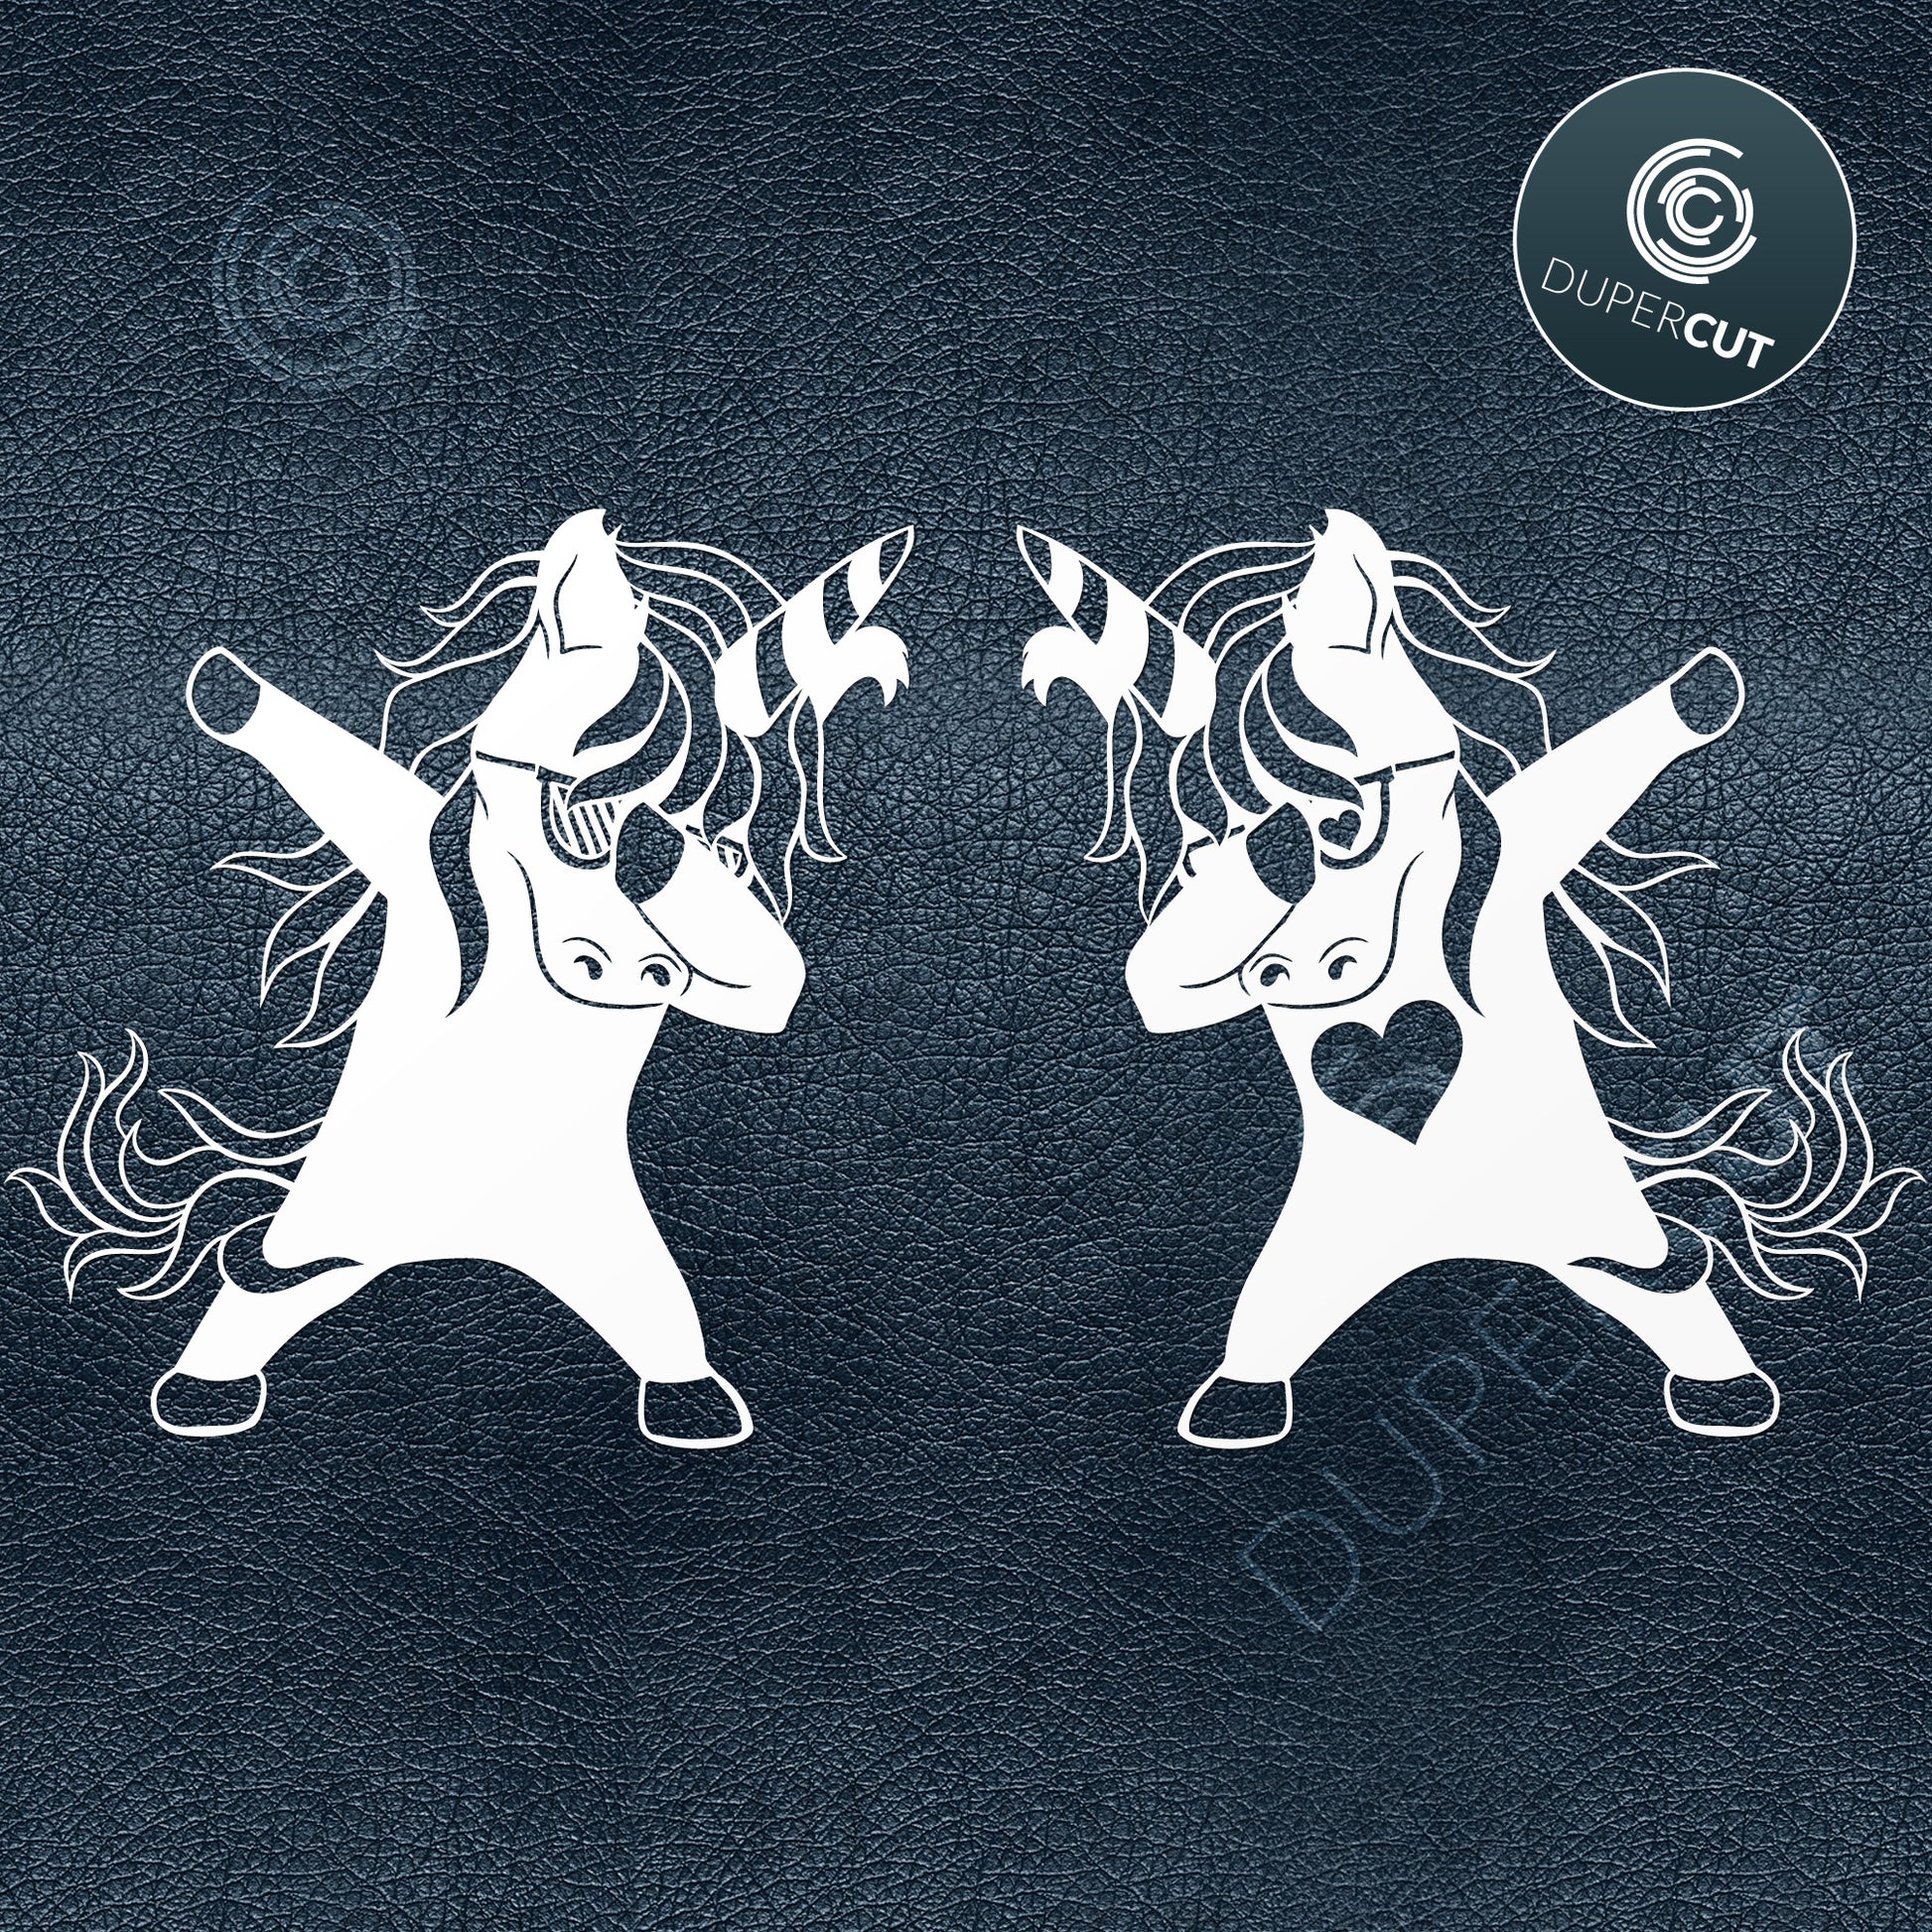 Dabbing unicorn with heart - SVG DXF laser cutting engraving vector files by DuperCut.com